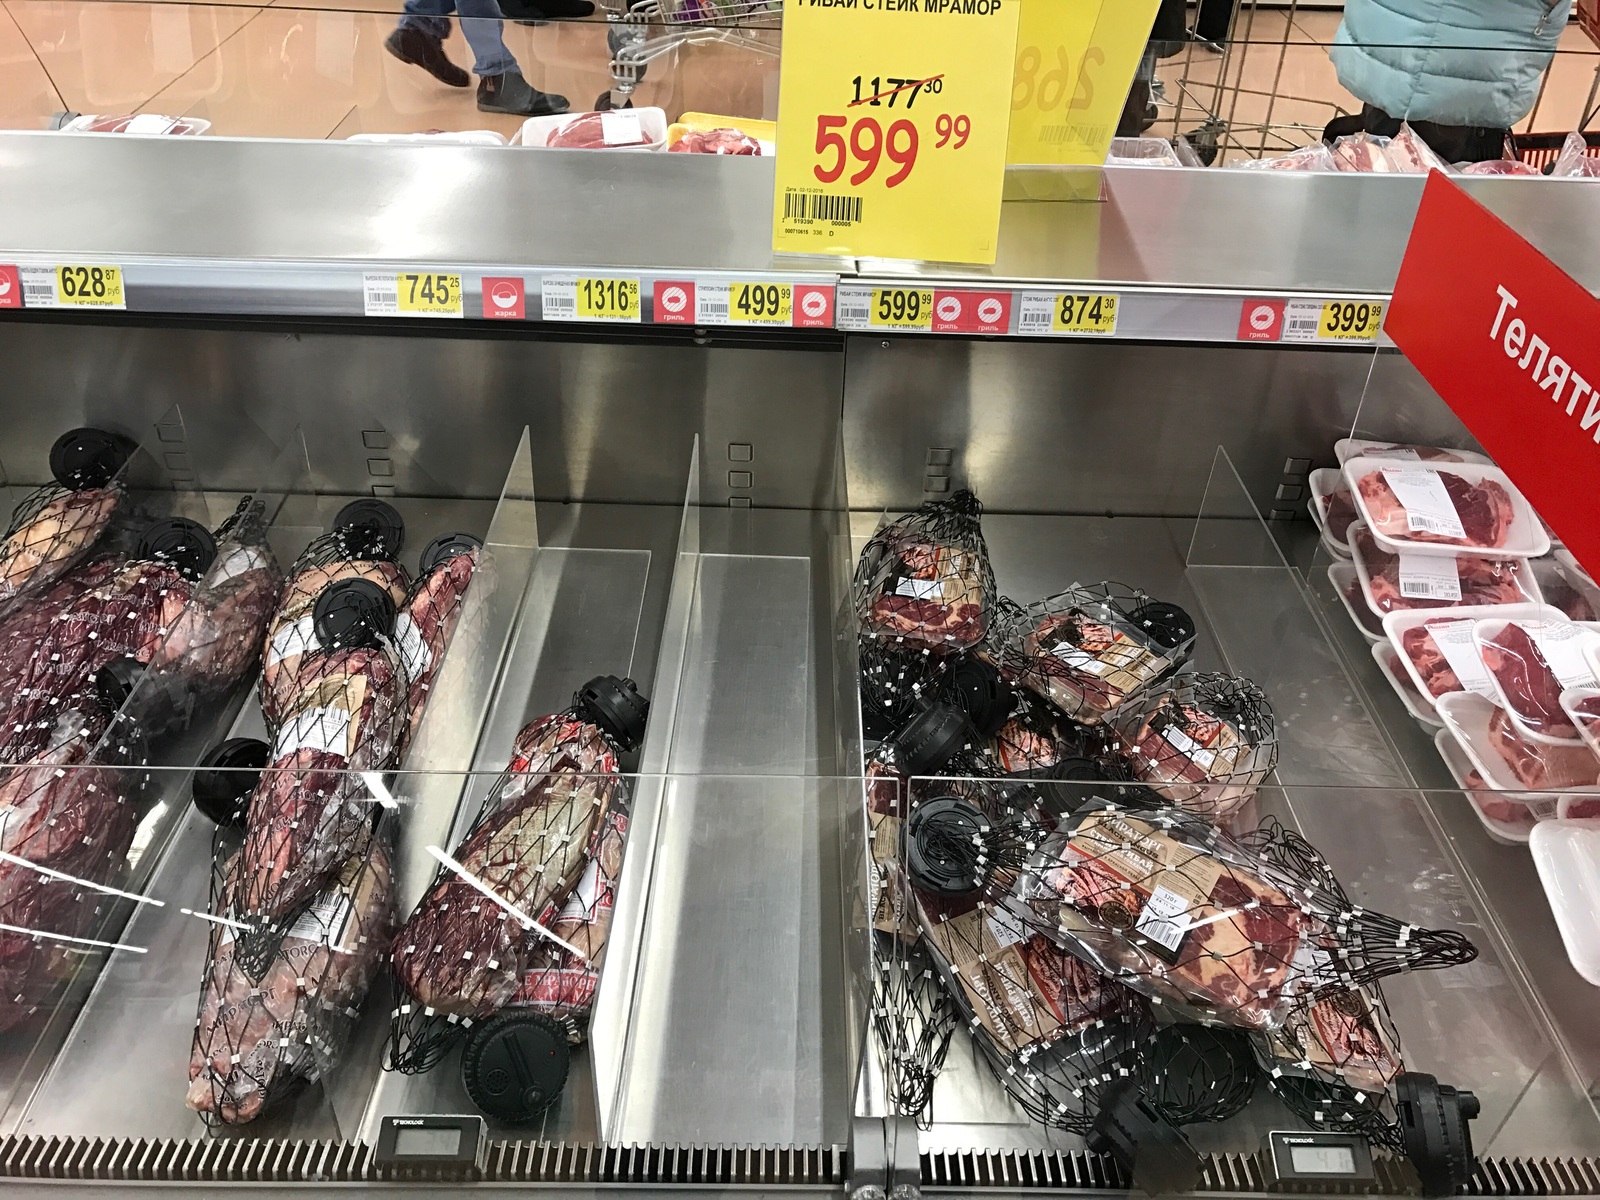 Deception with price tags in Auchan - My, Auchan, Price tag, Deception, Longpost